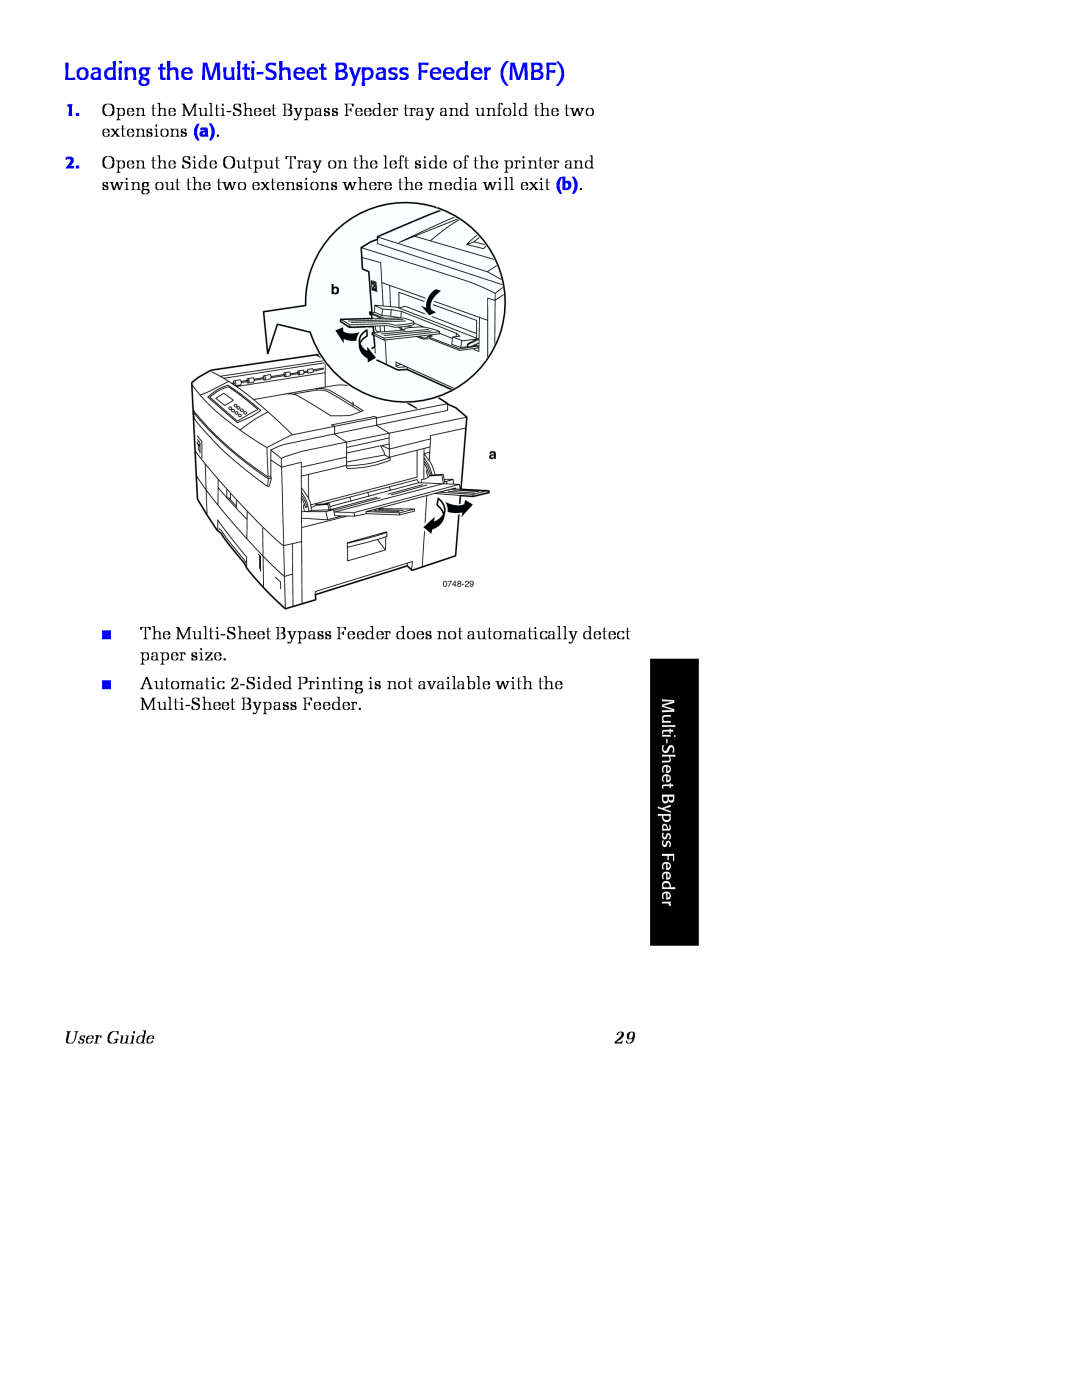 Xerox Phaser 2135 manual Loading the Multi-Sheet Bypass Feeder MBF, User Guide 